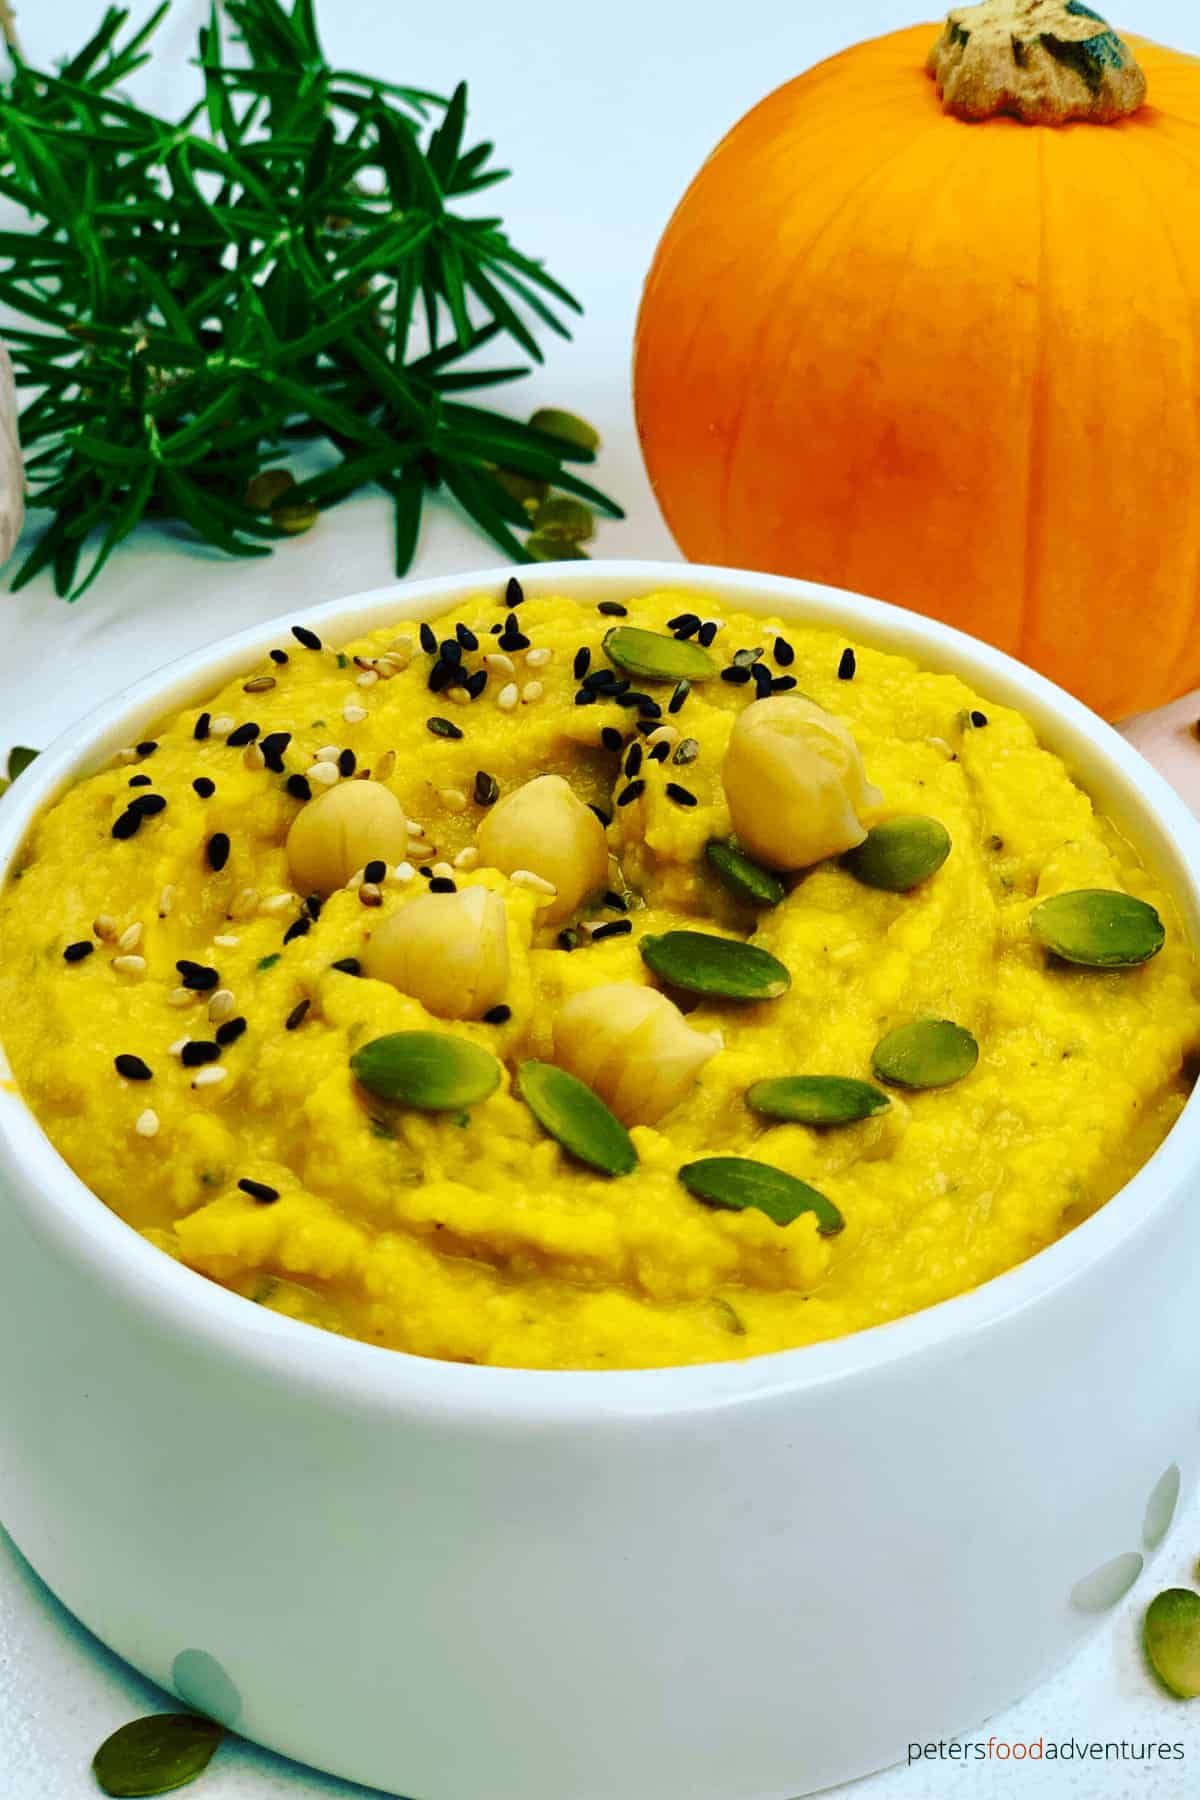 Easy Pumpkin Hummus is healthy appetizer and perfect for fall or Thanksgiving. Made in minutes, with pumpkin, chickpeas, garlic and rosemary. A vegan savory dip that everyone will enjoy.